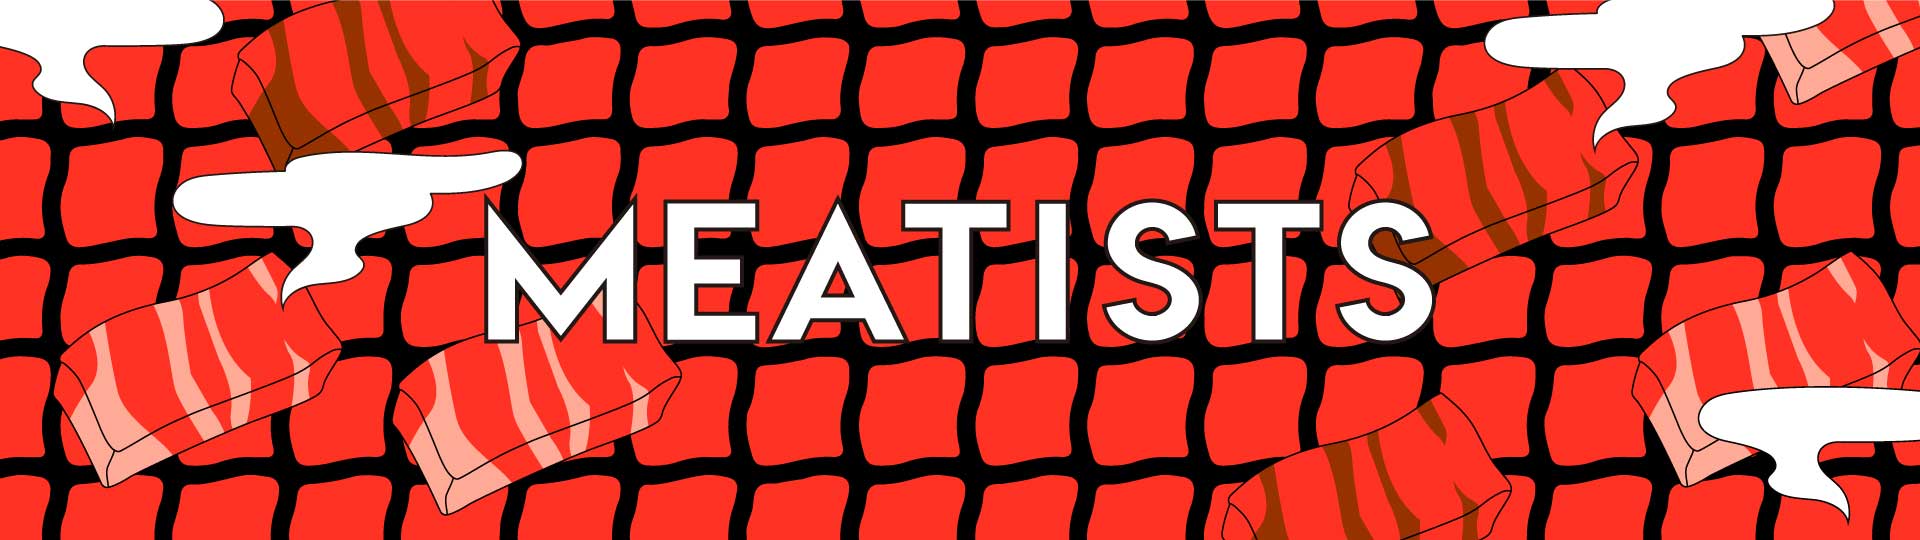 MEATISTS